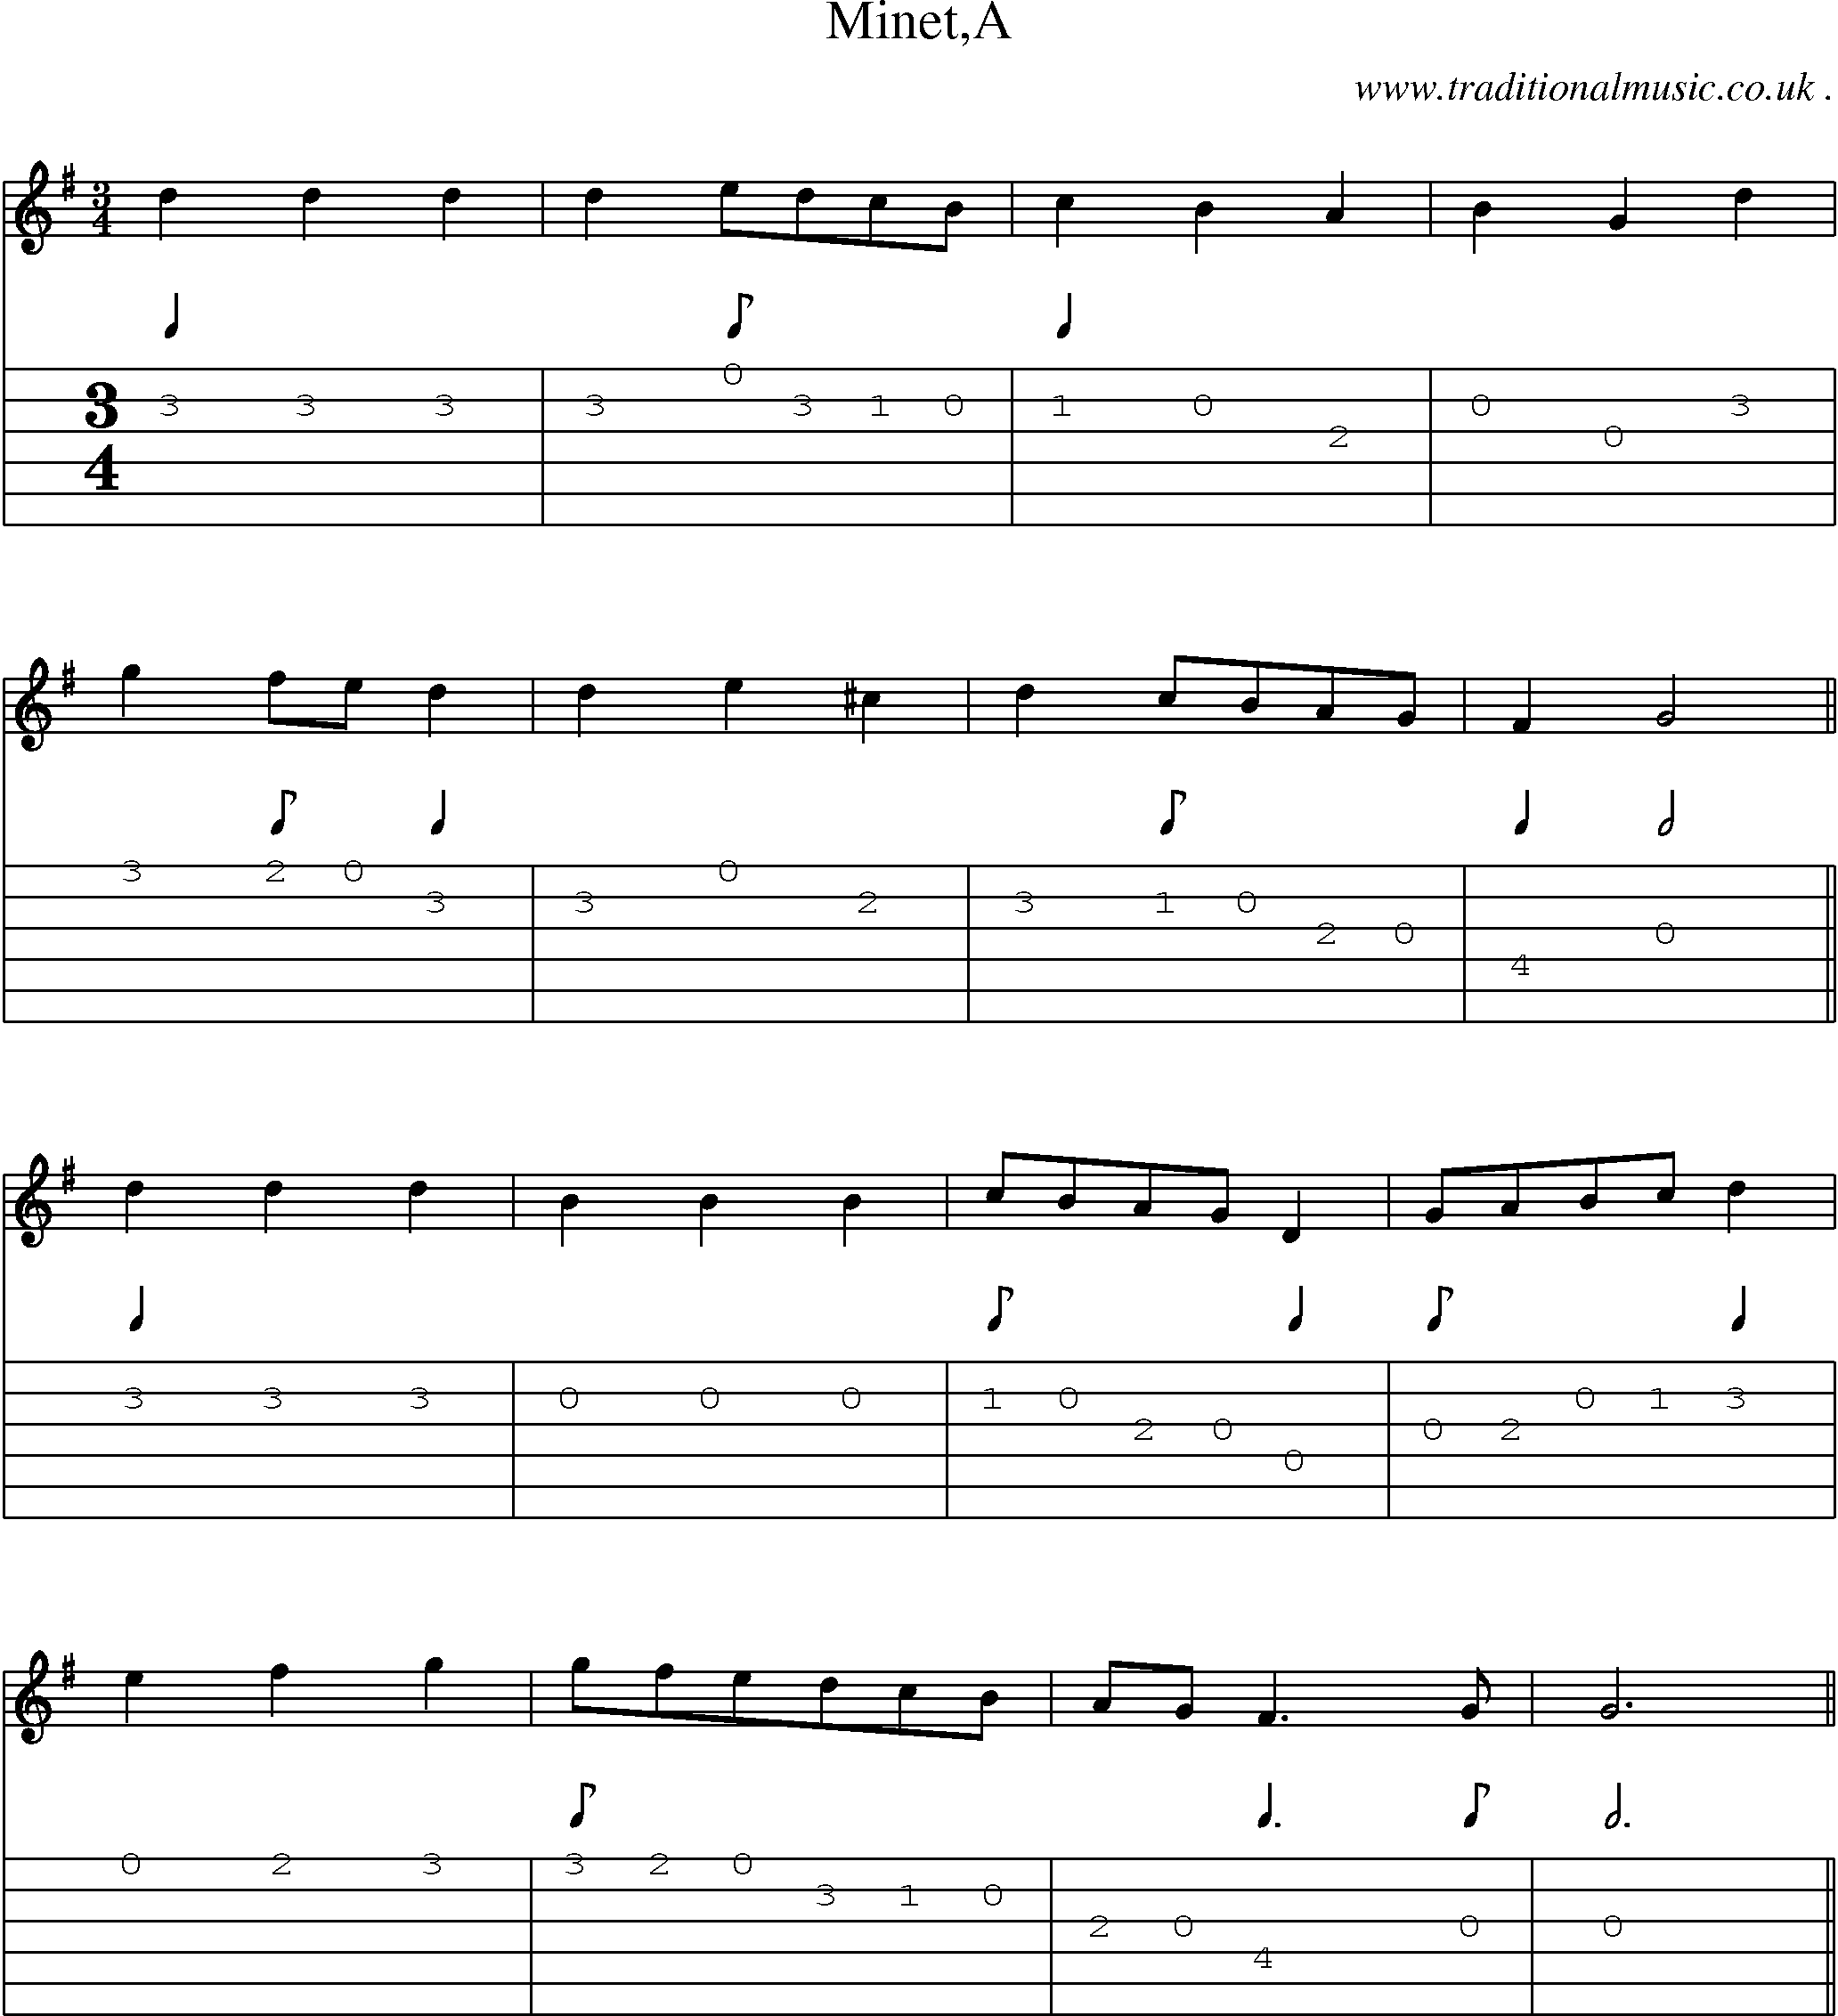 Sheet-Music and Guitar Tabs for Mineta